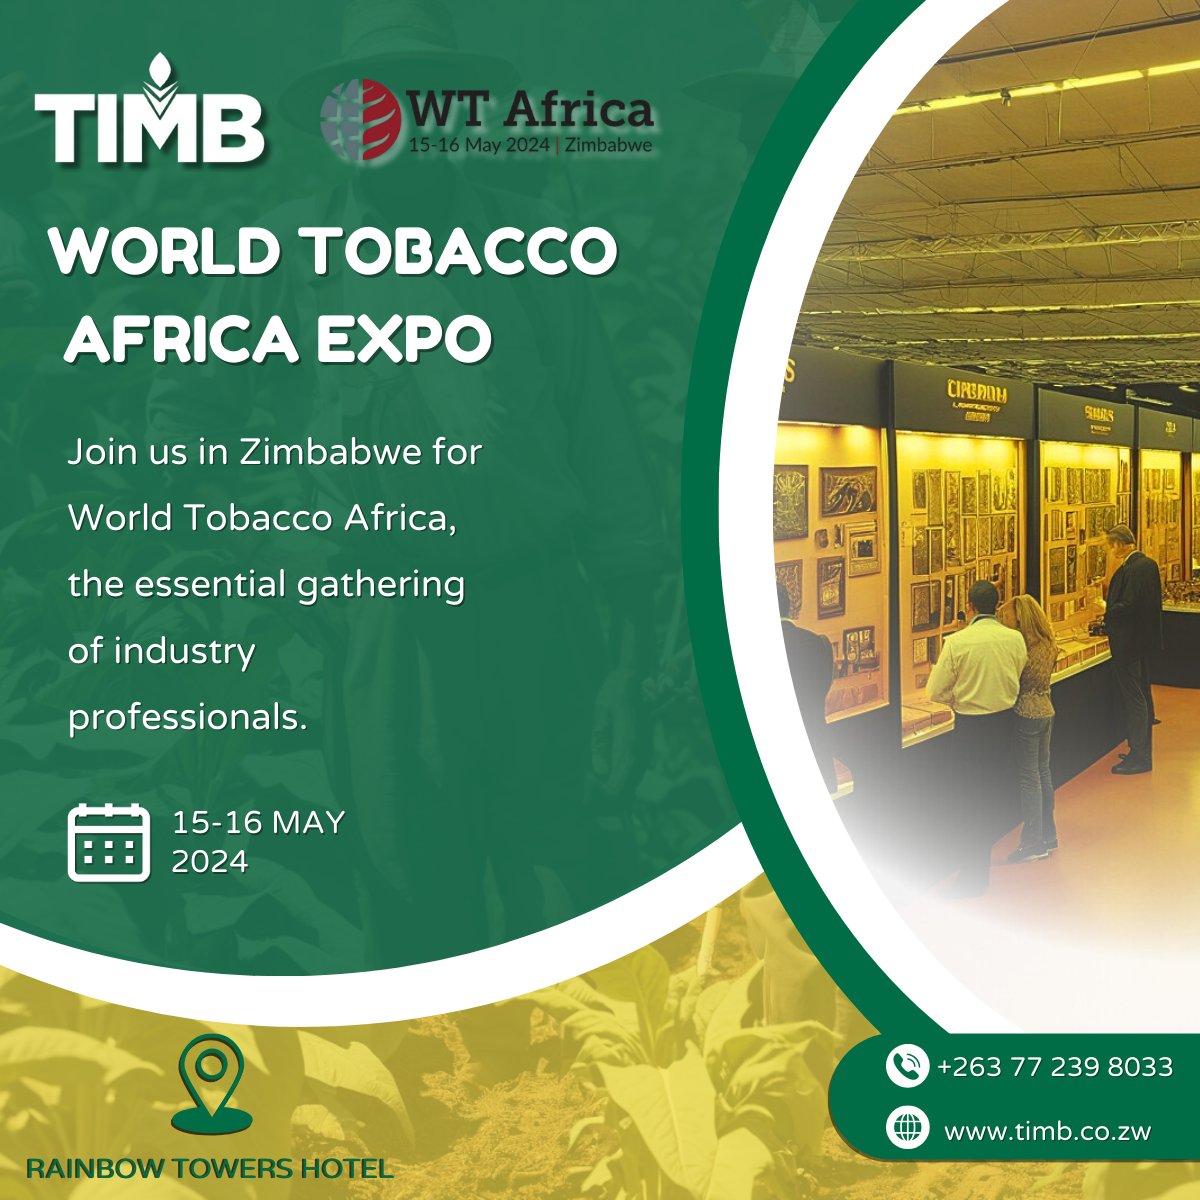 The first inaugural World Tobacco Africa Expo is 6 days away. Join me in Zimbabwe!! #wtafrica24 #Zimbabwe #harare #forlivelihoods #forsustainability #dubai #tobaccoindustry #networking #worldtobacco #eventprofs #b2bevents #events #tobacconetwork